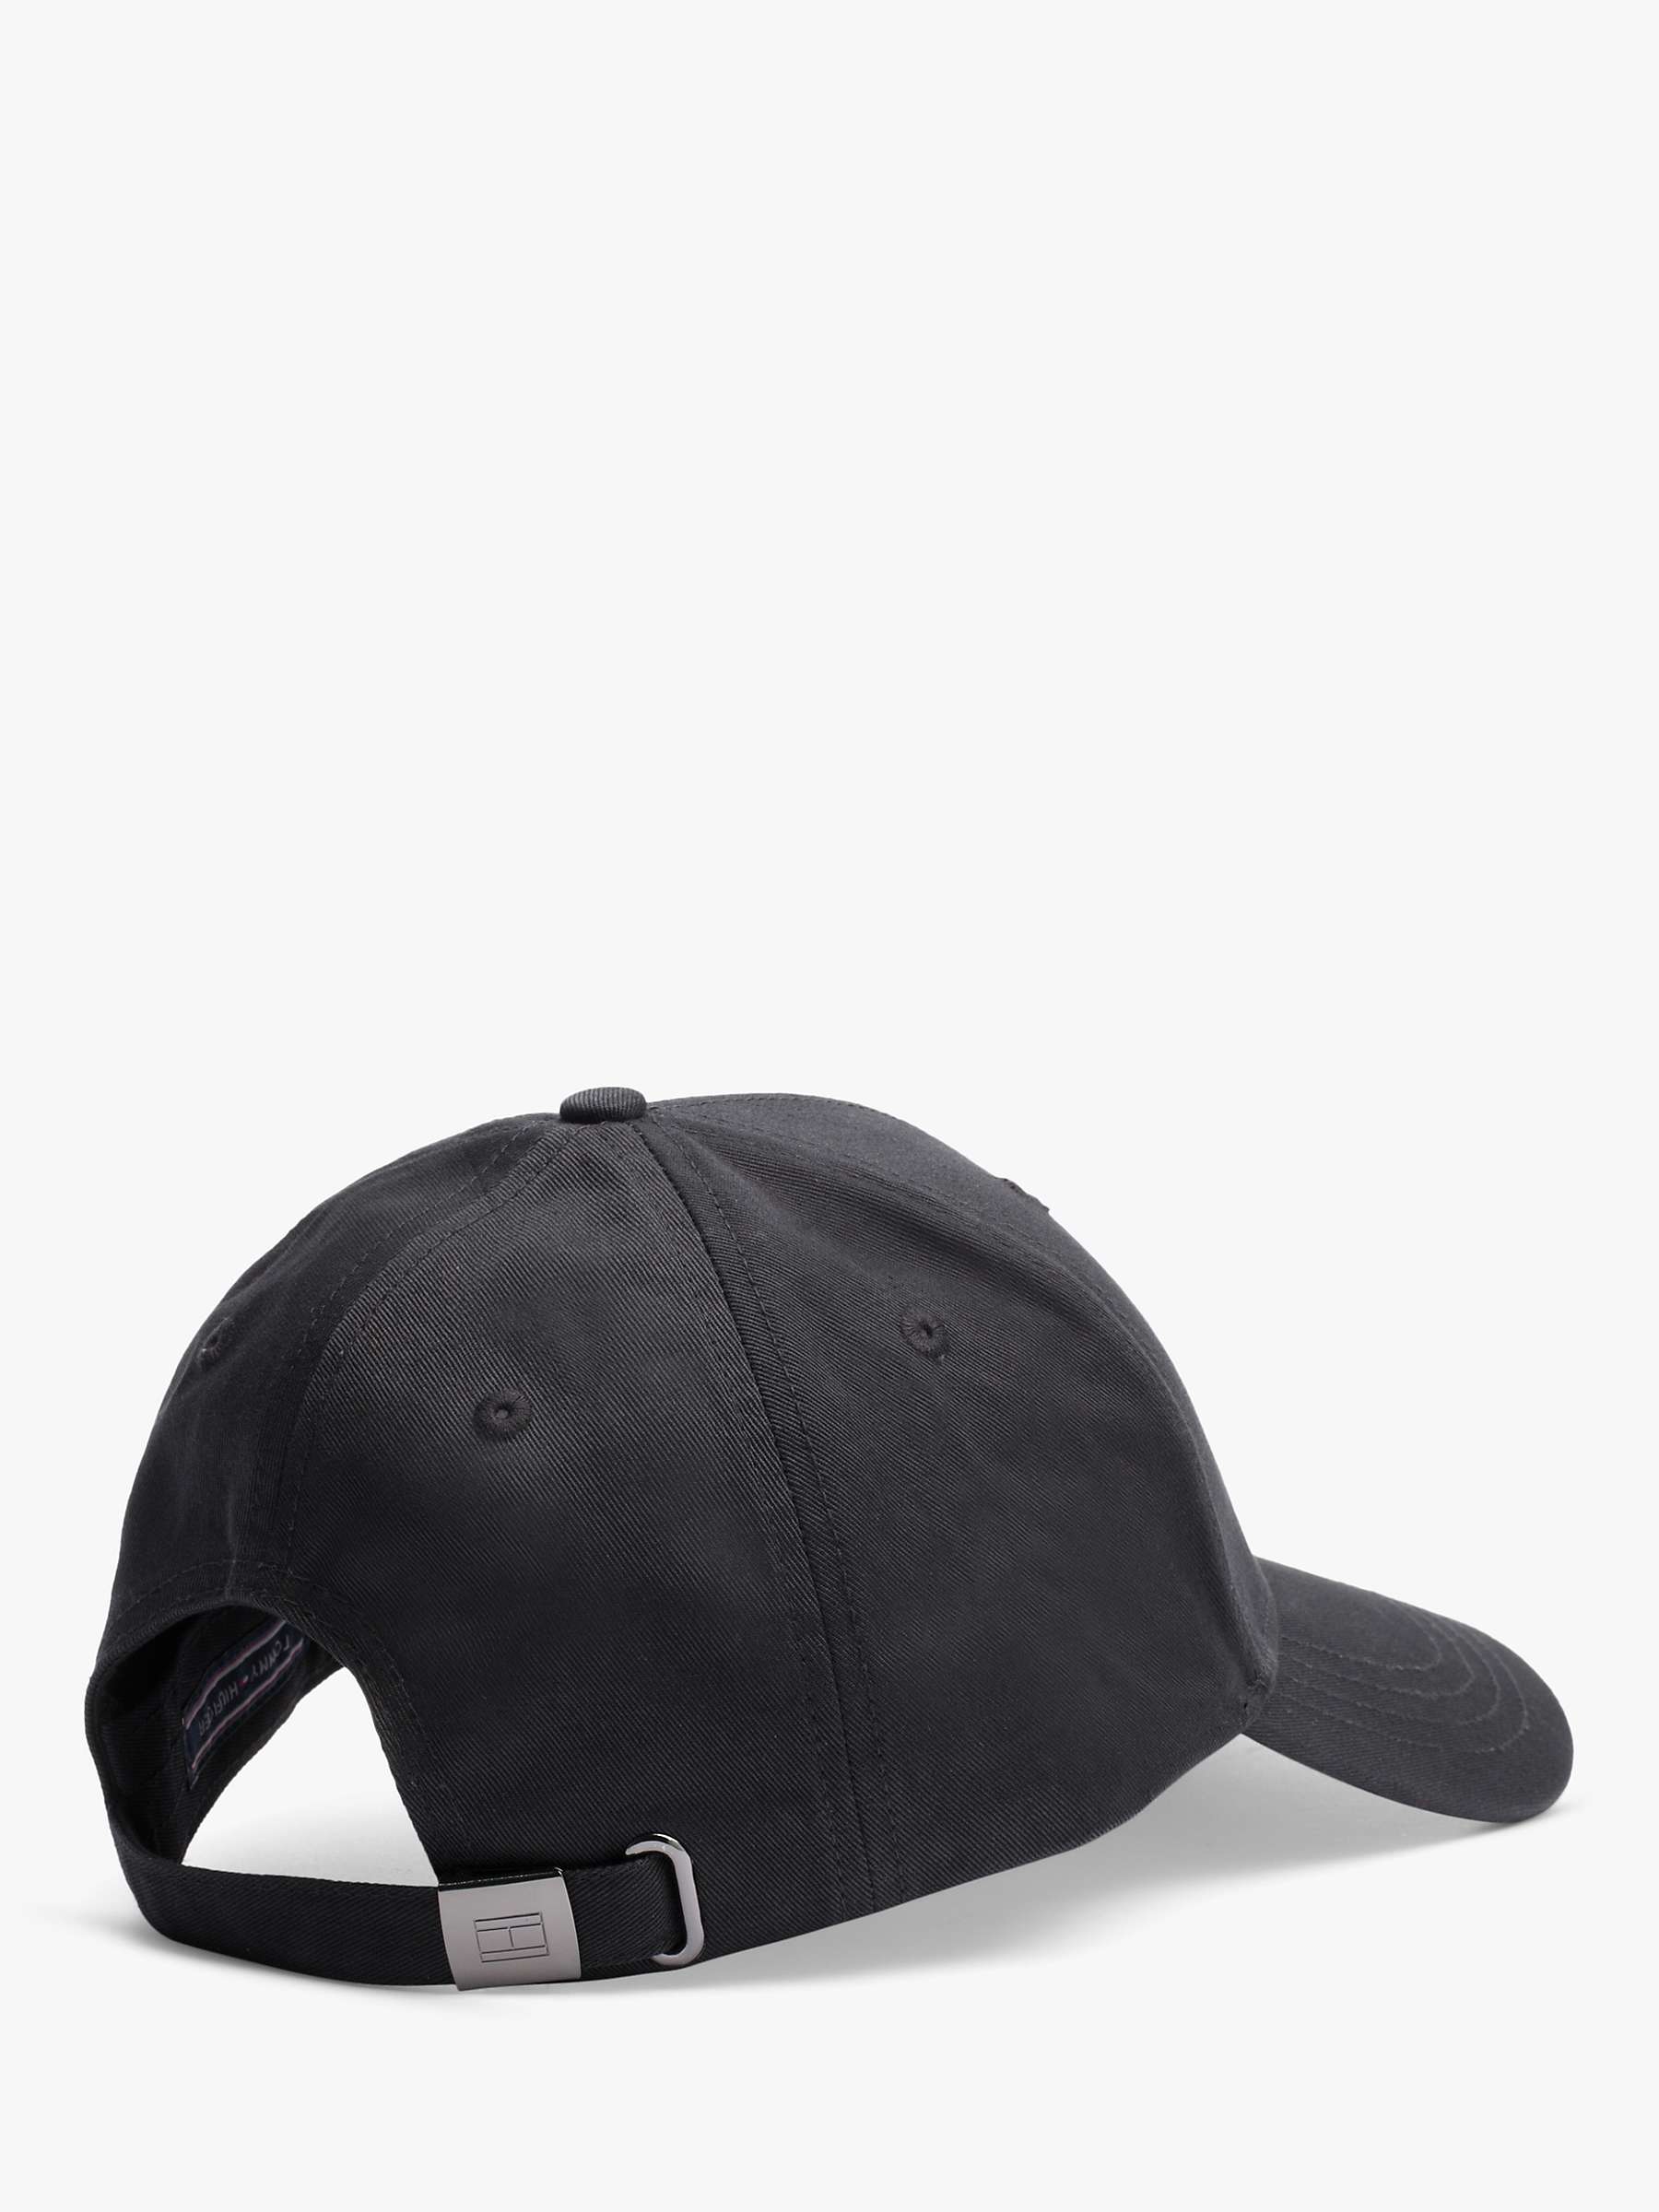 Buy Tommy Hilfiger Classic Baseball Cap, One Size Online at johnlewis.com